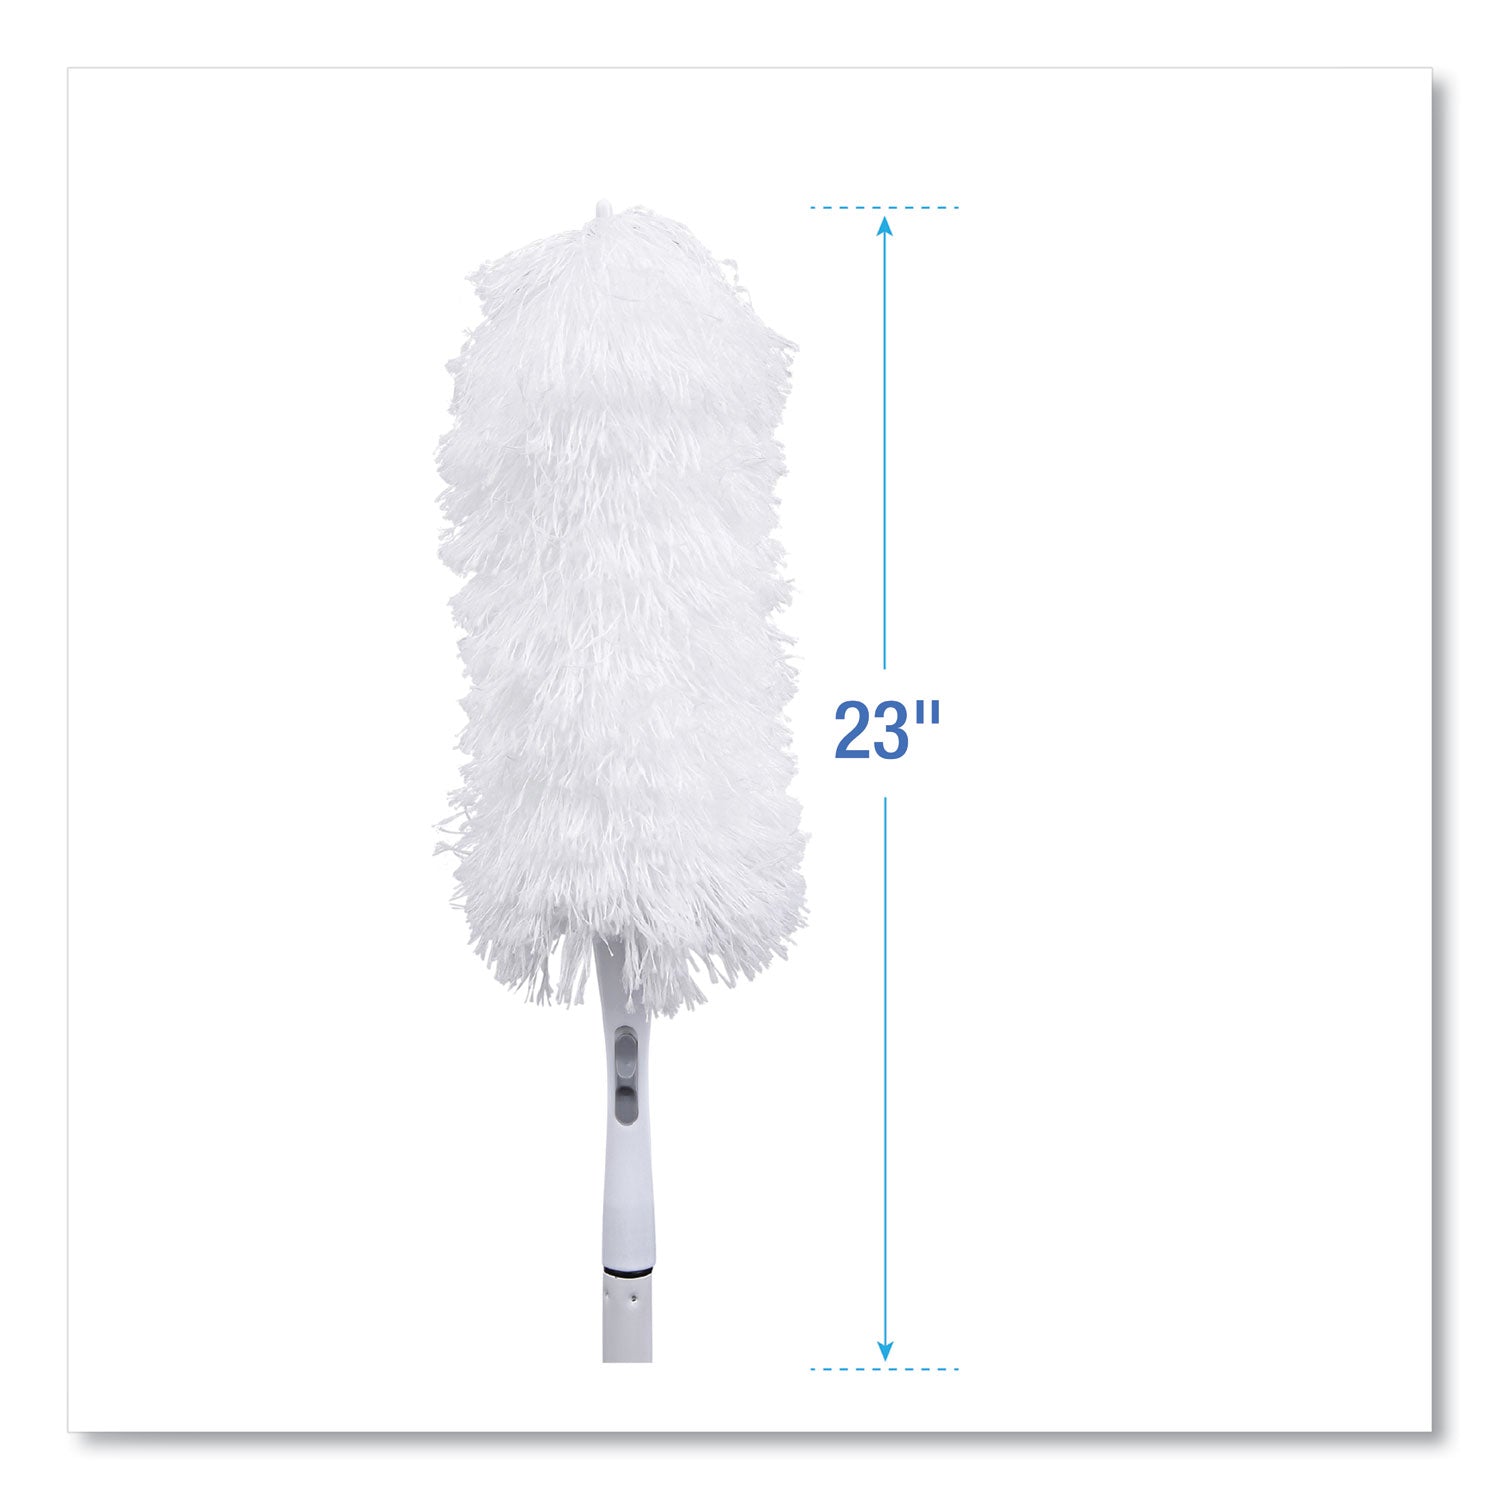 microfeather-duster-microfiber-feathers-washable-23-white_bwkmicroduster - 2